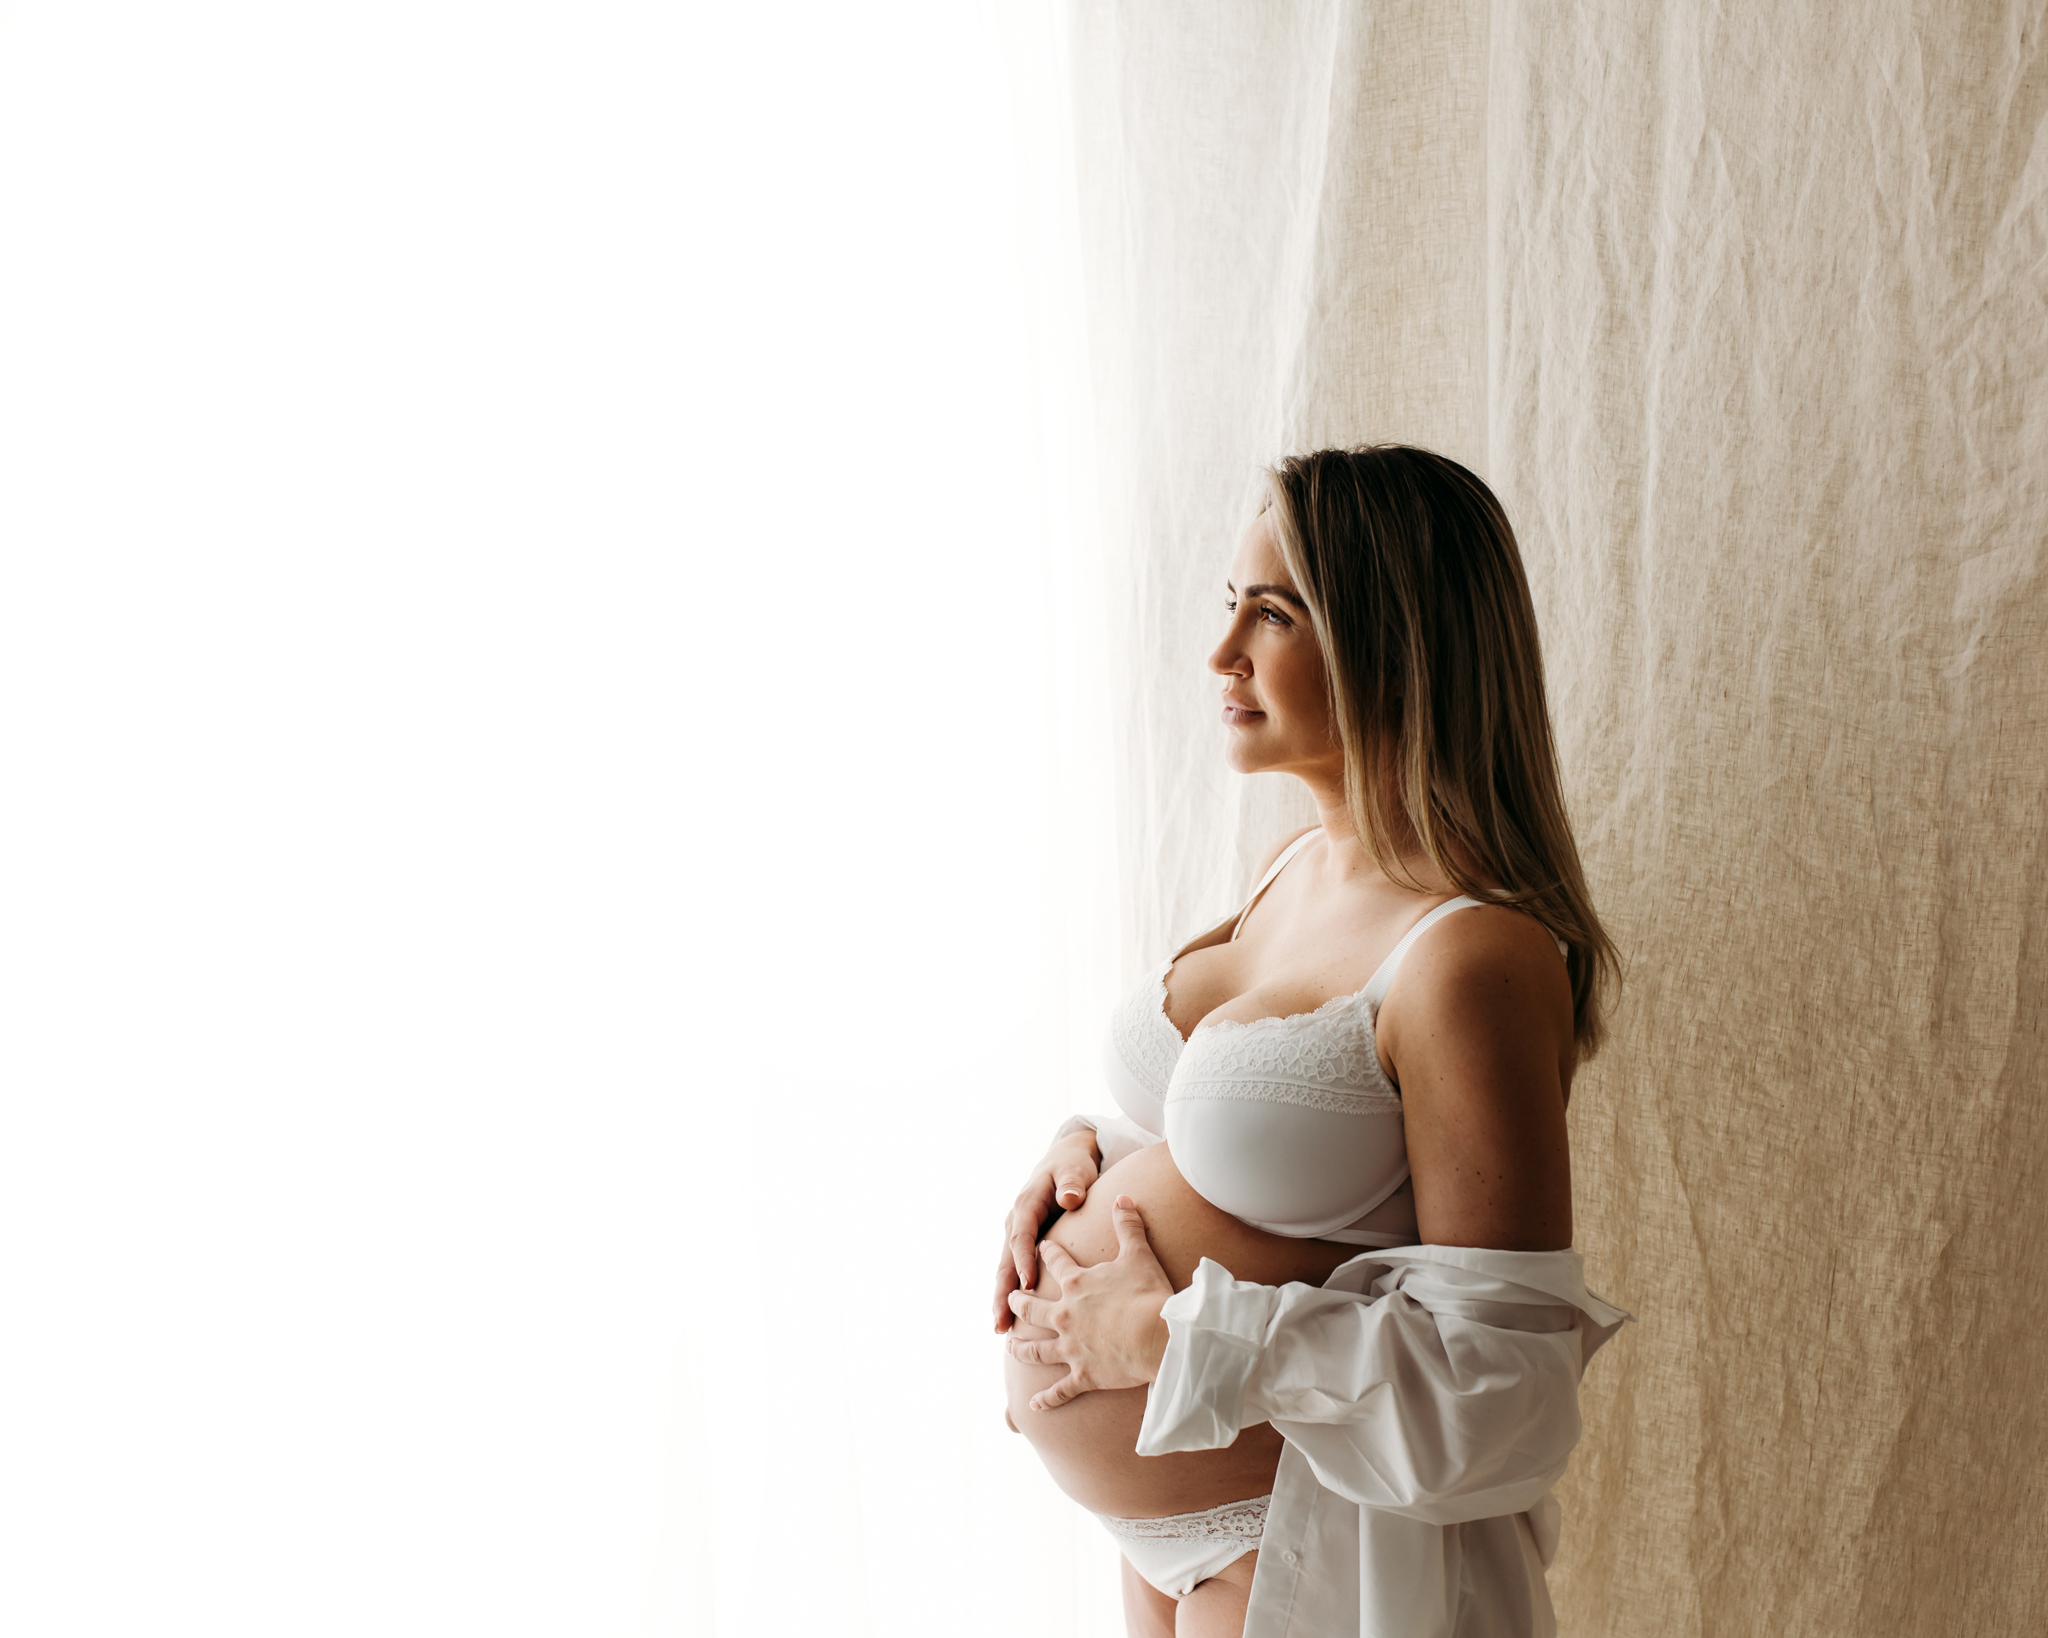 Beautiful pregnant woman at maternity photoshoot by Wirral photographer.